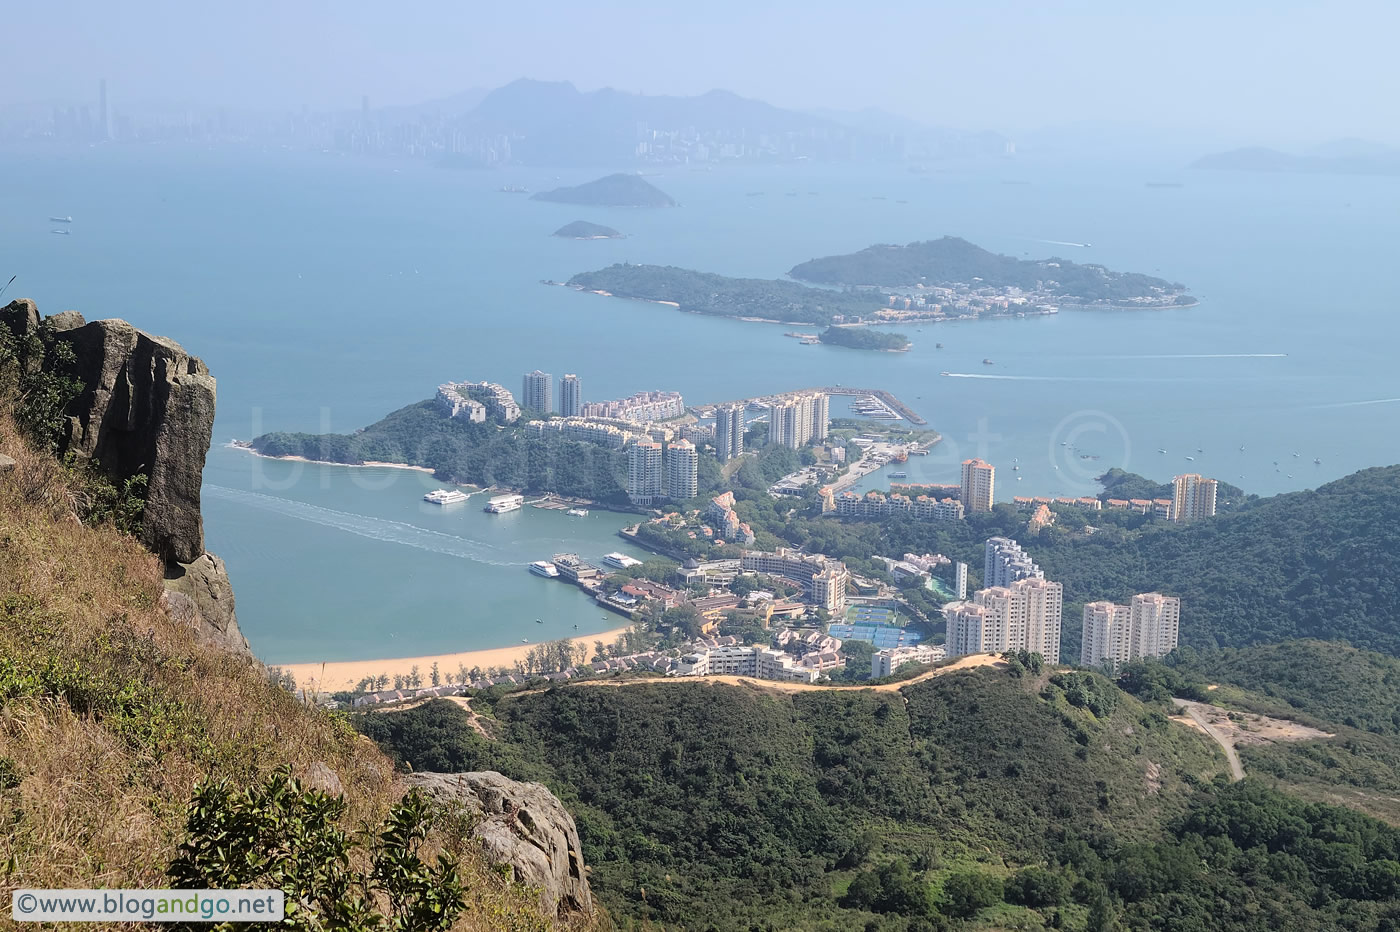 Discovery Bay to Mui Wo via Tiger's Head - On the Tiger's Head